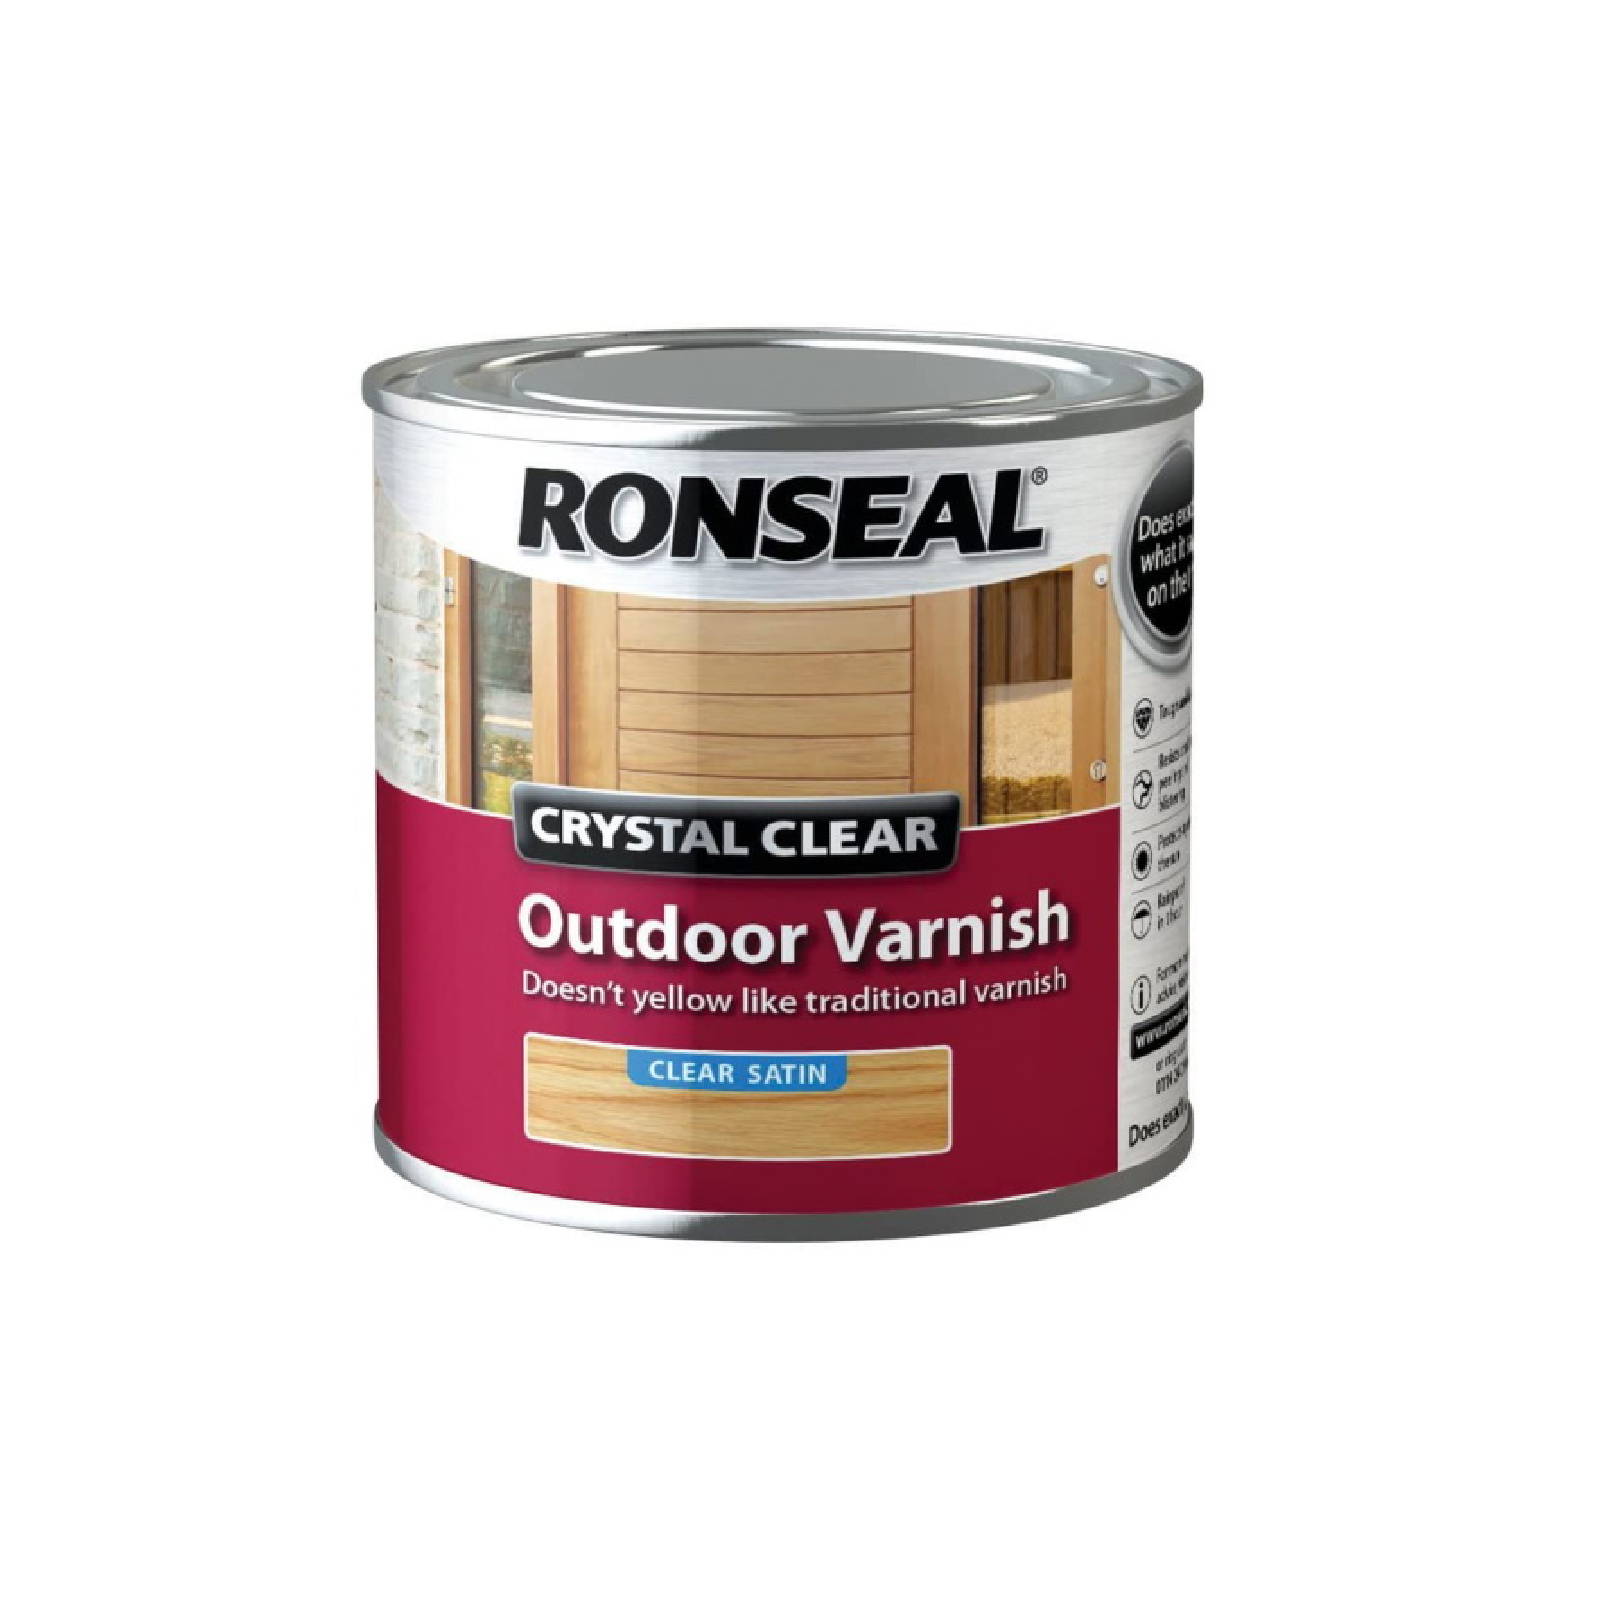 RONSEAL Crystal Clear OUTDOOR VARNISH Clear SATIN 250ML 37364